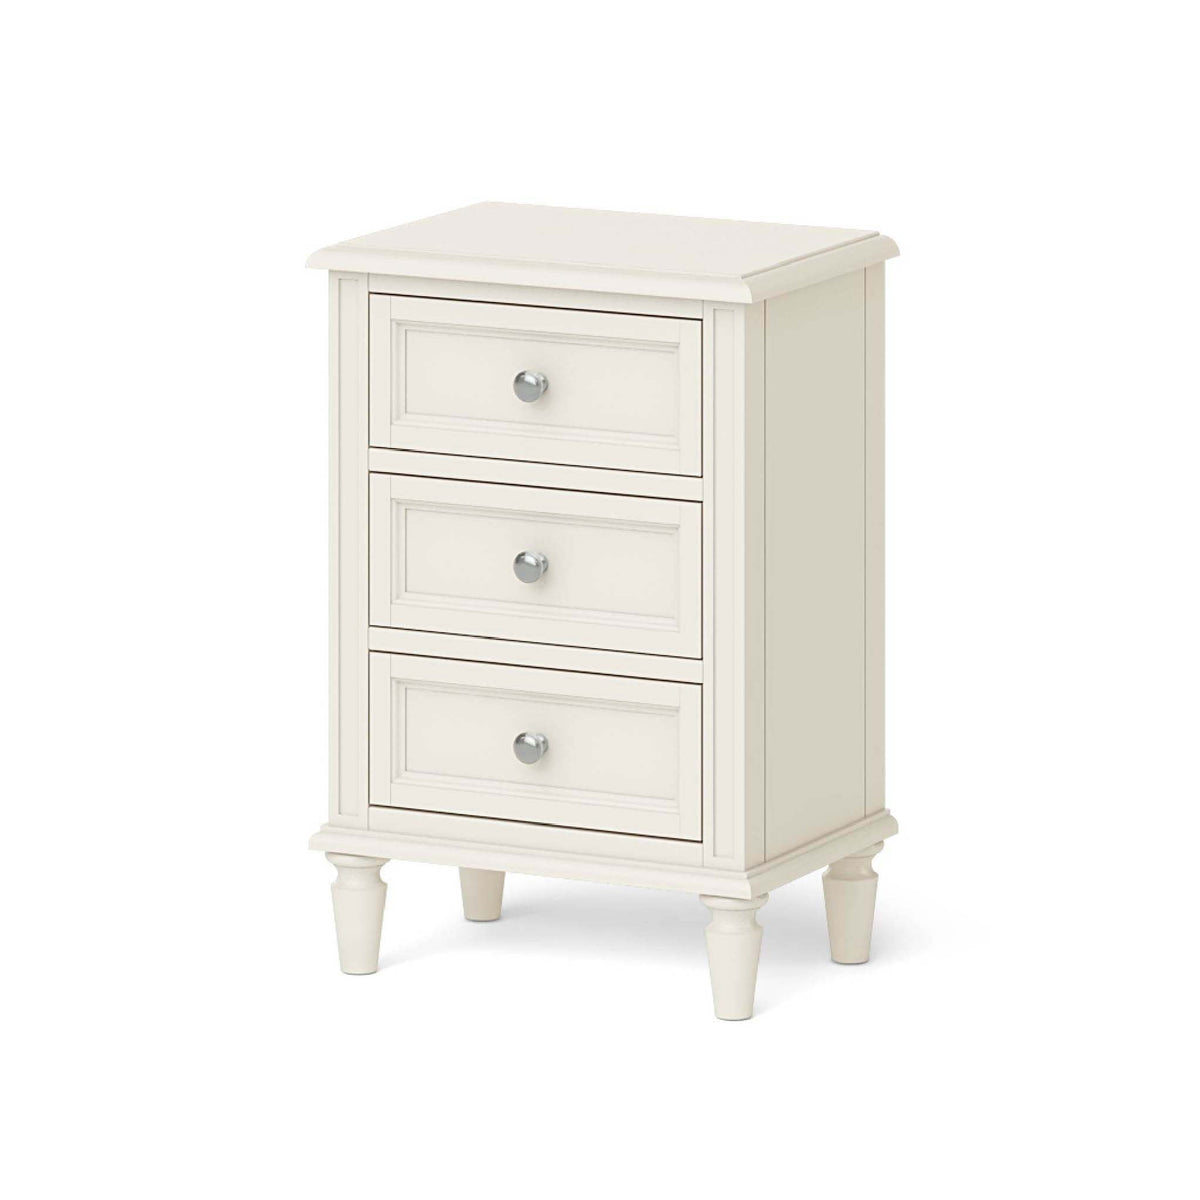 The Mulsanne Cream French Style Bedside Table with 3 Drawers